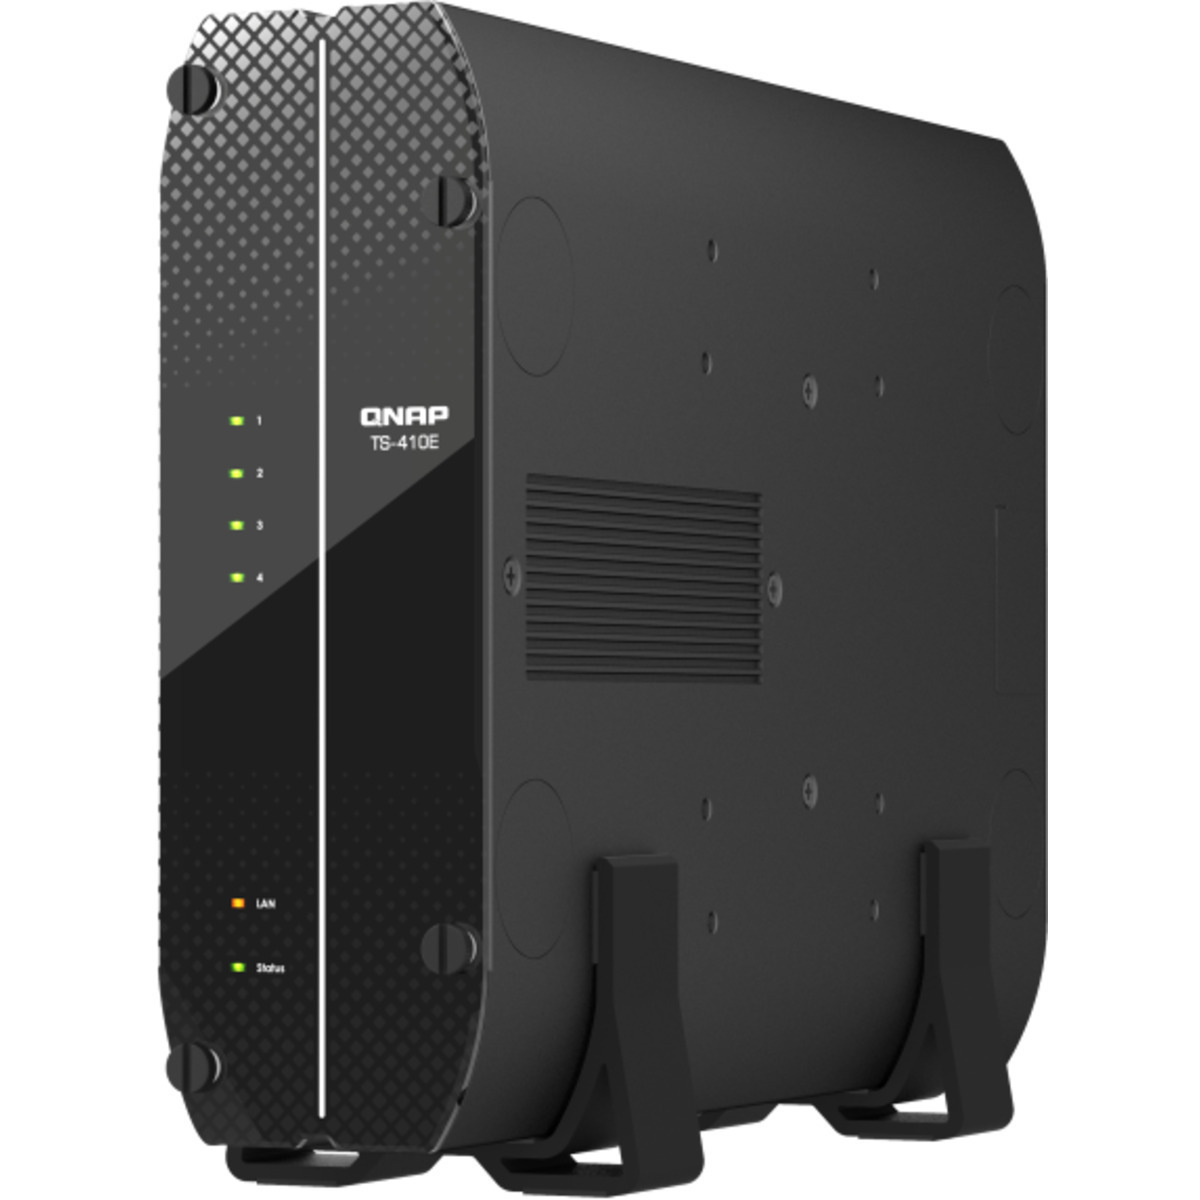 QNAP TS-410E 6tb 4-Bay Desktop Multimedia / Power User / Business NAS - Network Attached Storage Device 3x2tb Samsung 870 QVO MZ-77Q2T0 2.5 560/530MB/s SATA 6Gb/s SSD CONSUMER Class Drives Installed - Burn-In Tested TS-410E